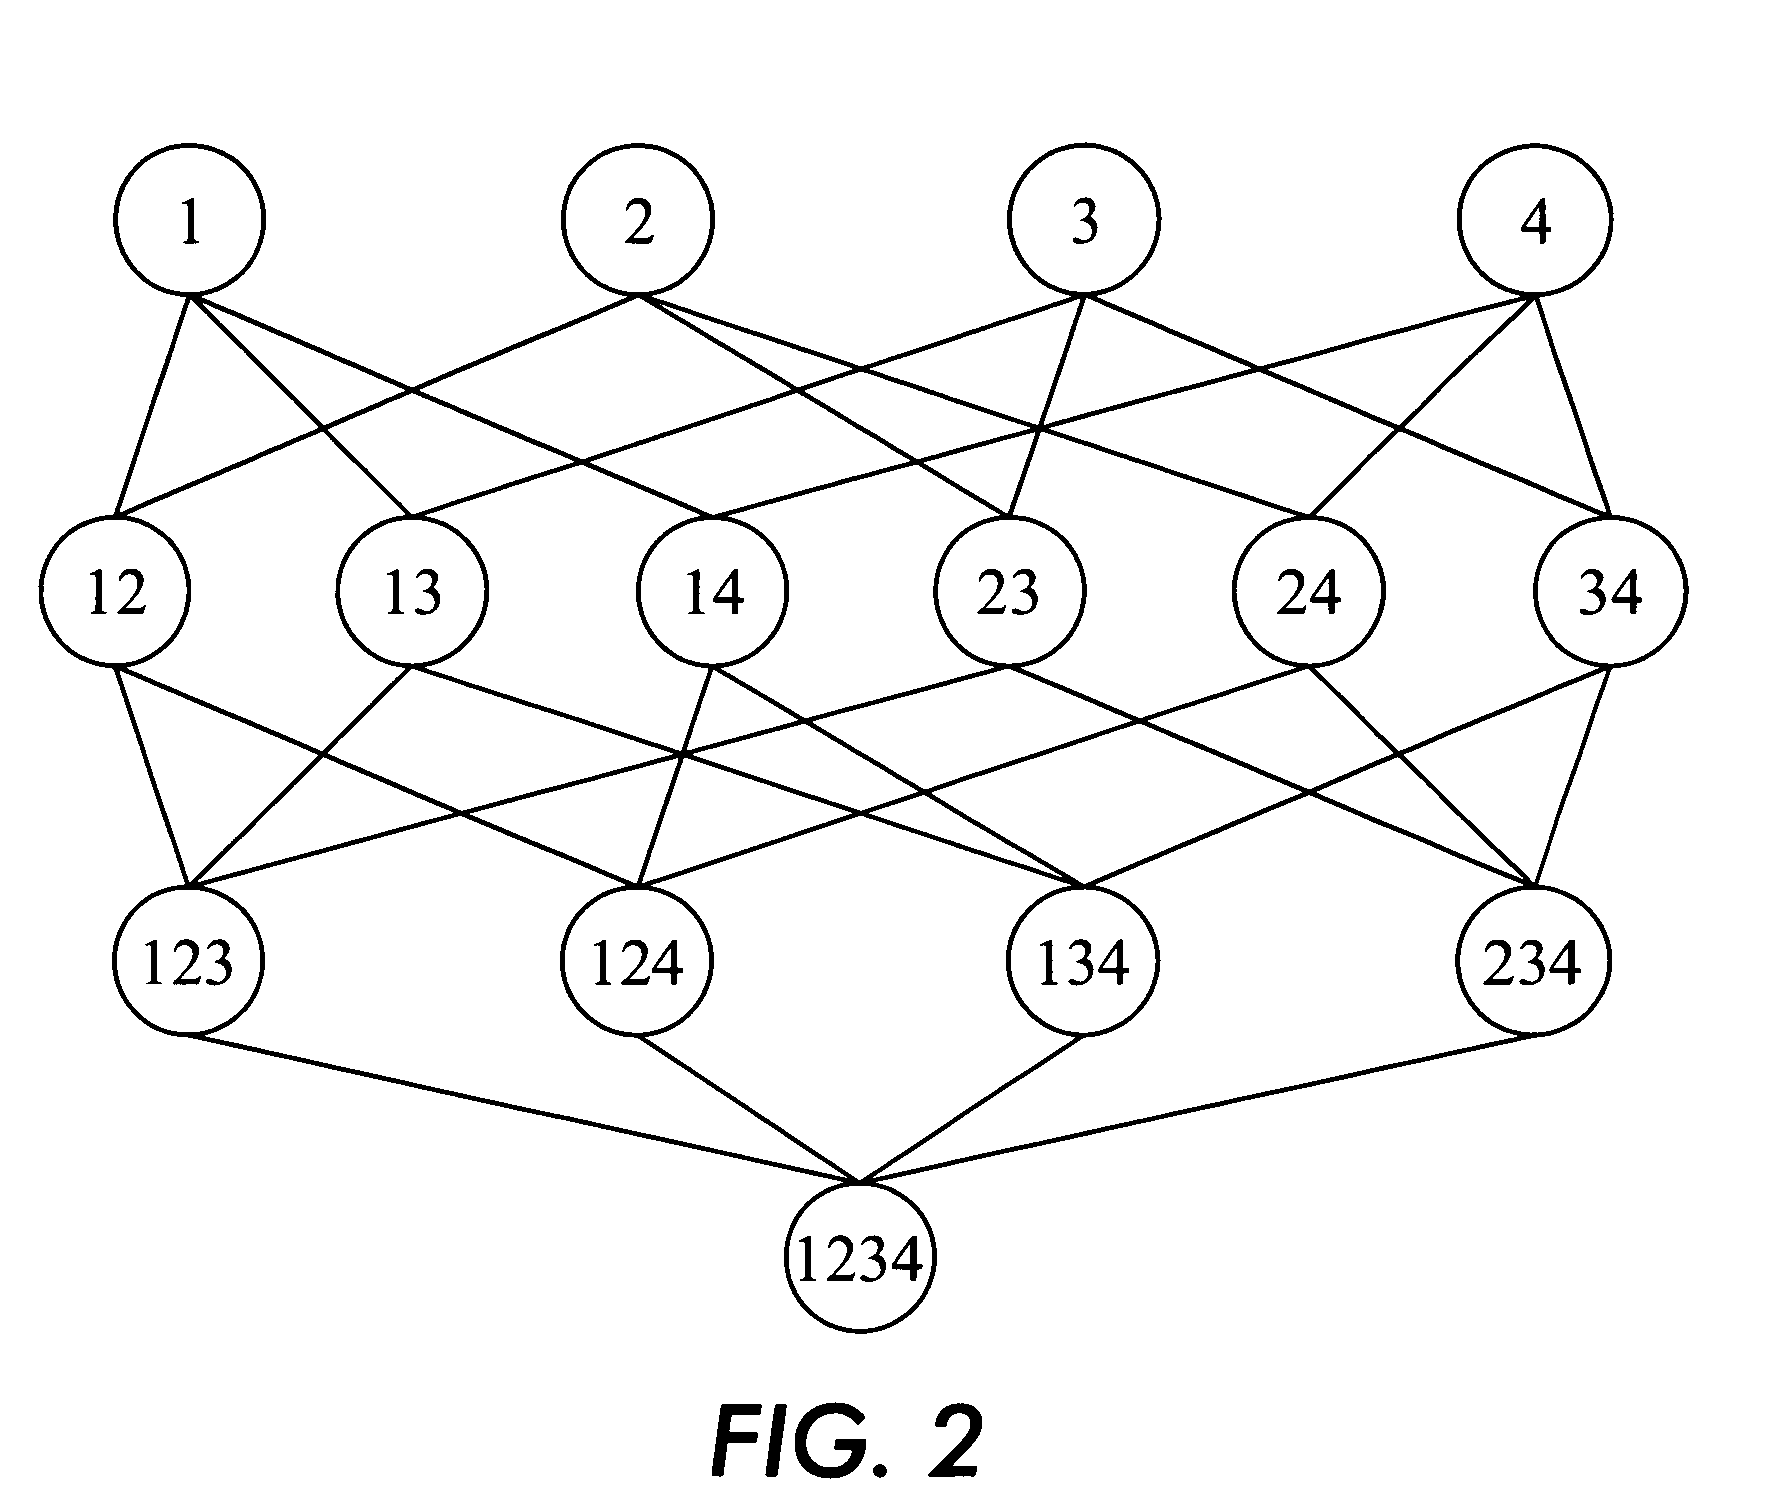 Method for multi-class, multi-label categorization using probabilistic hierarchical modeling